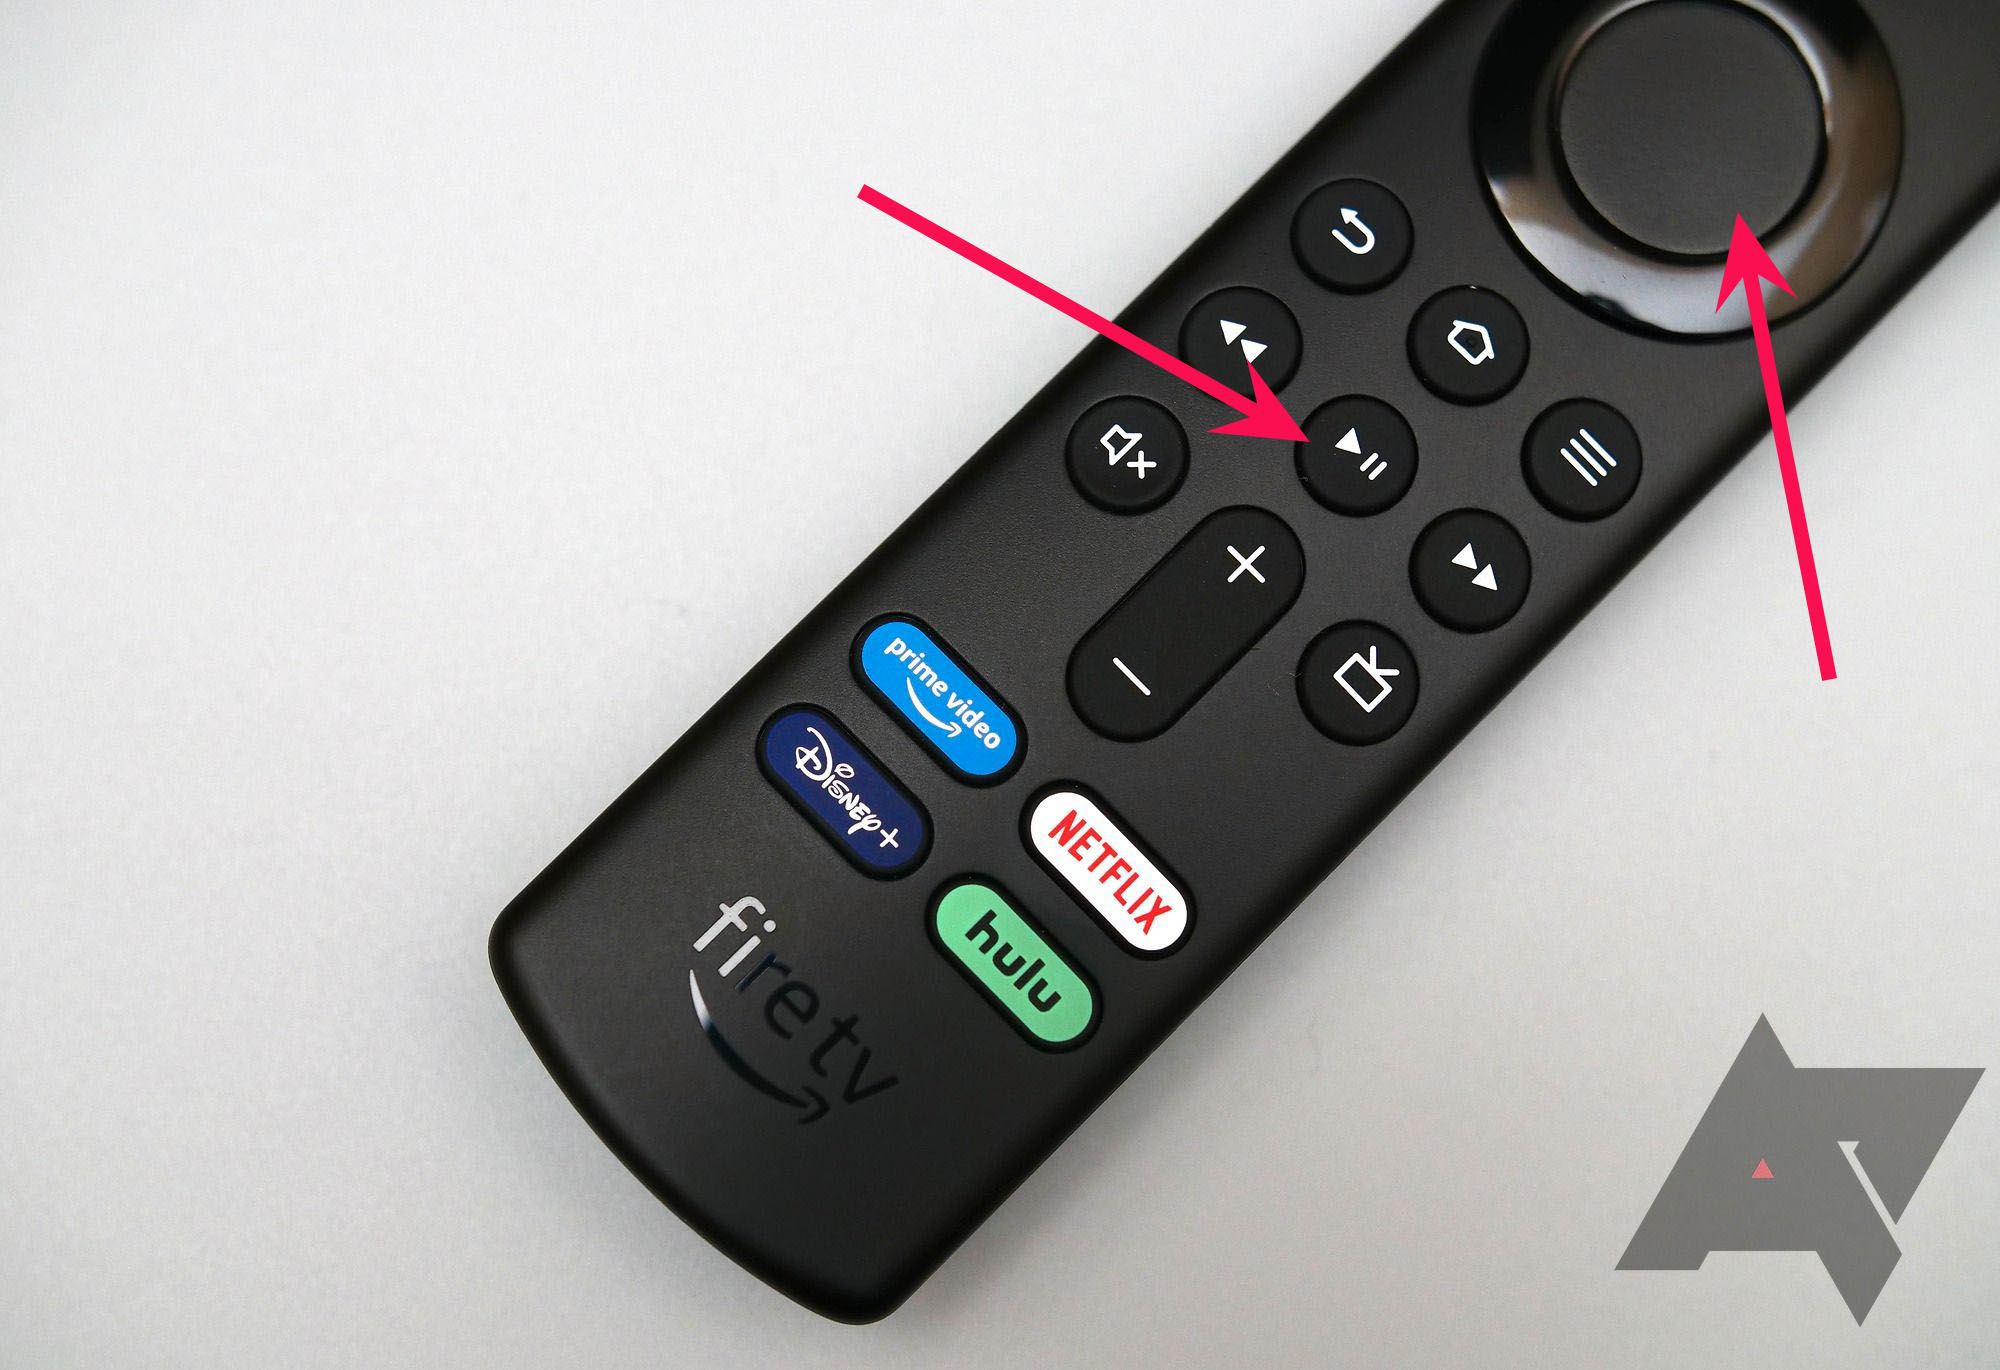 restart Fire TV with remote